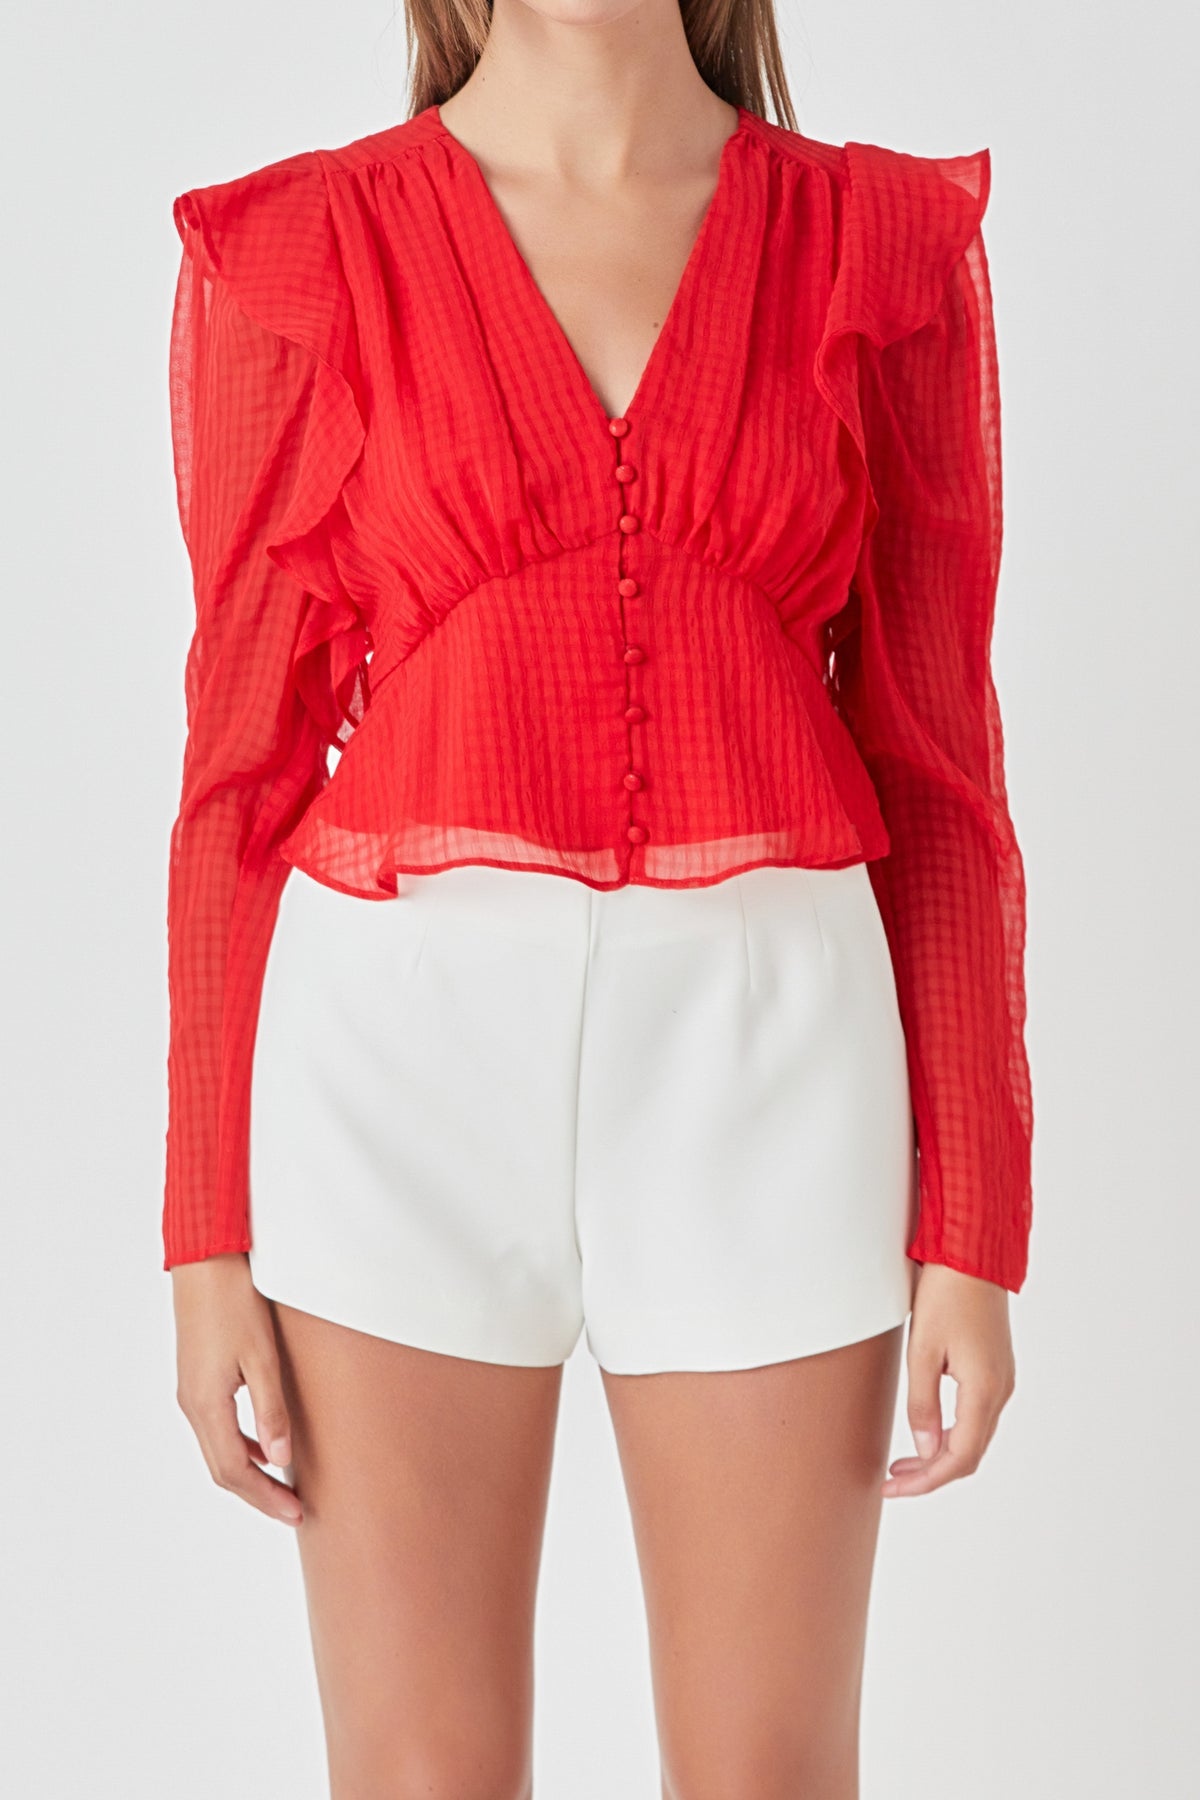 ENDLESS ROSE - Shoulder Ruffle Detailed Plunge Neck Woven Top - TOPS available at Objectrare